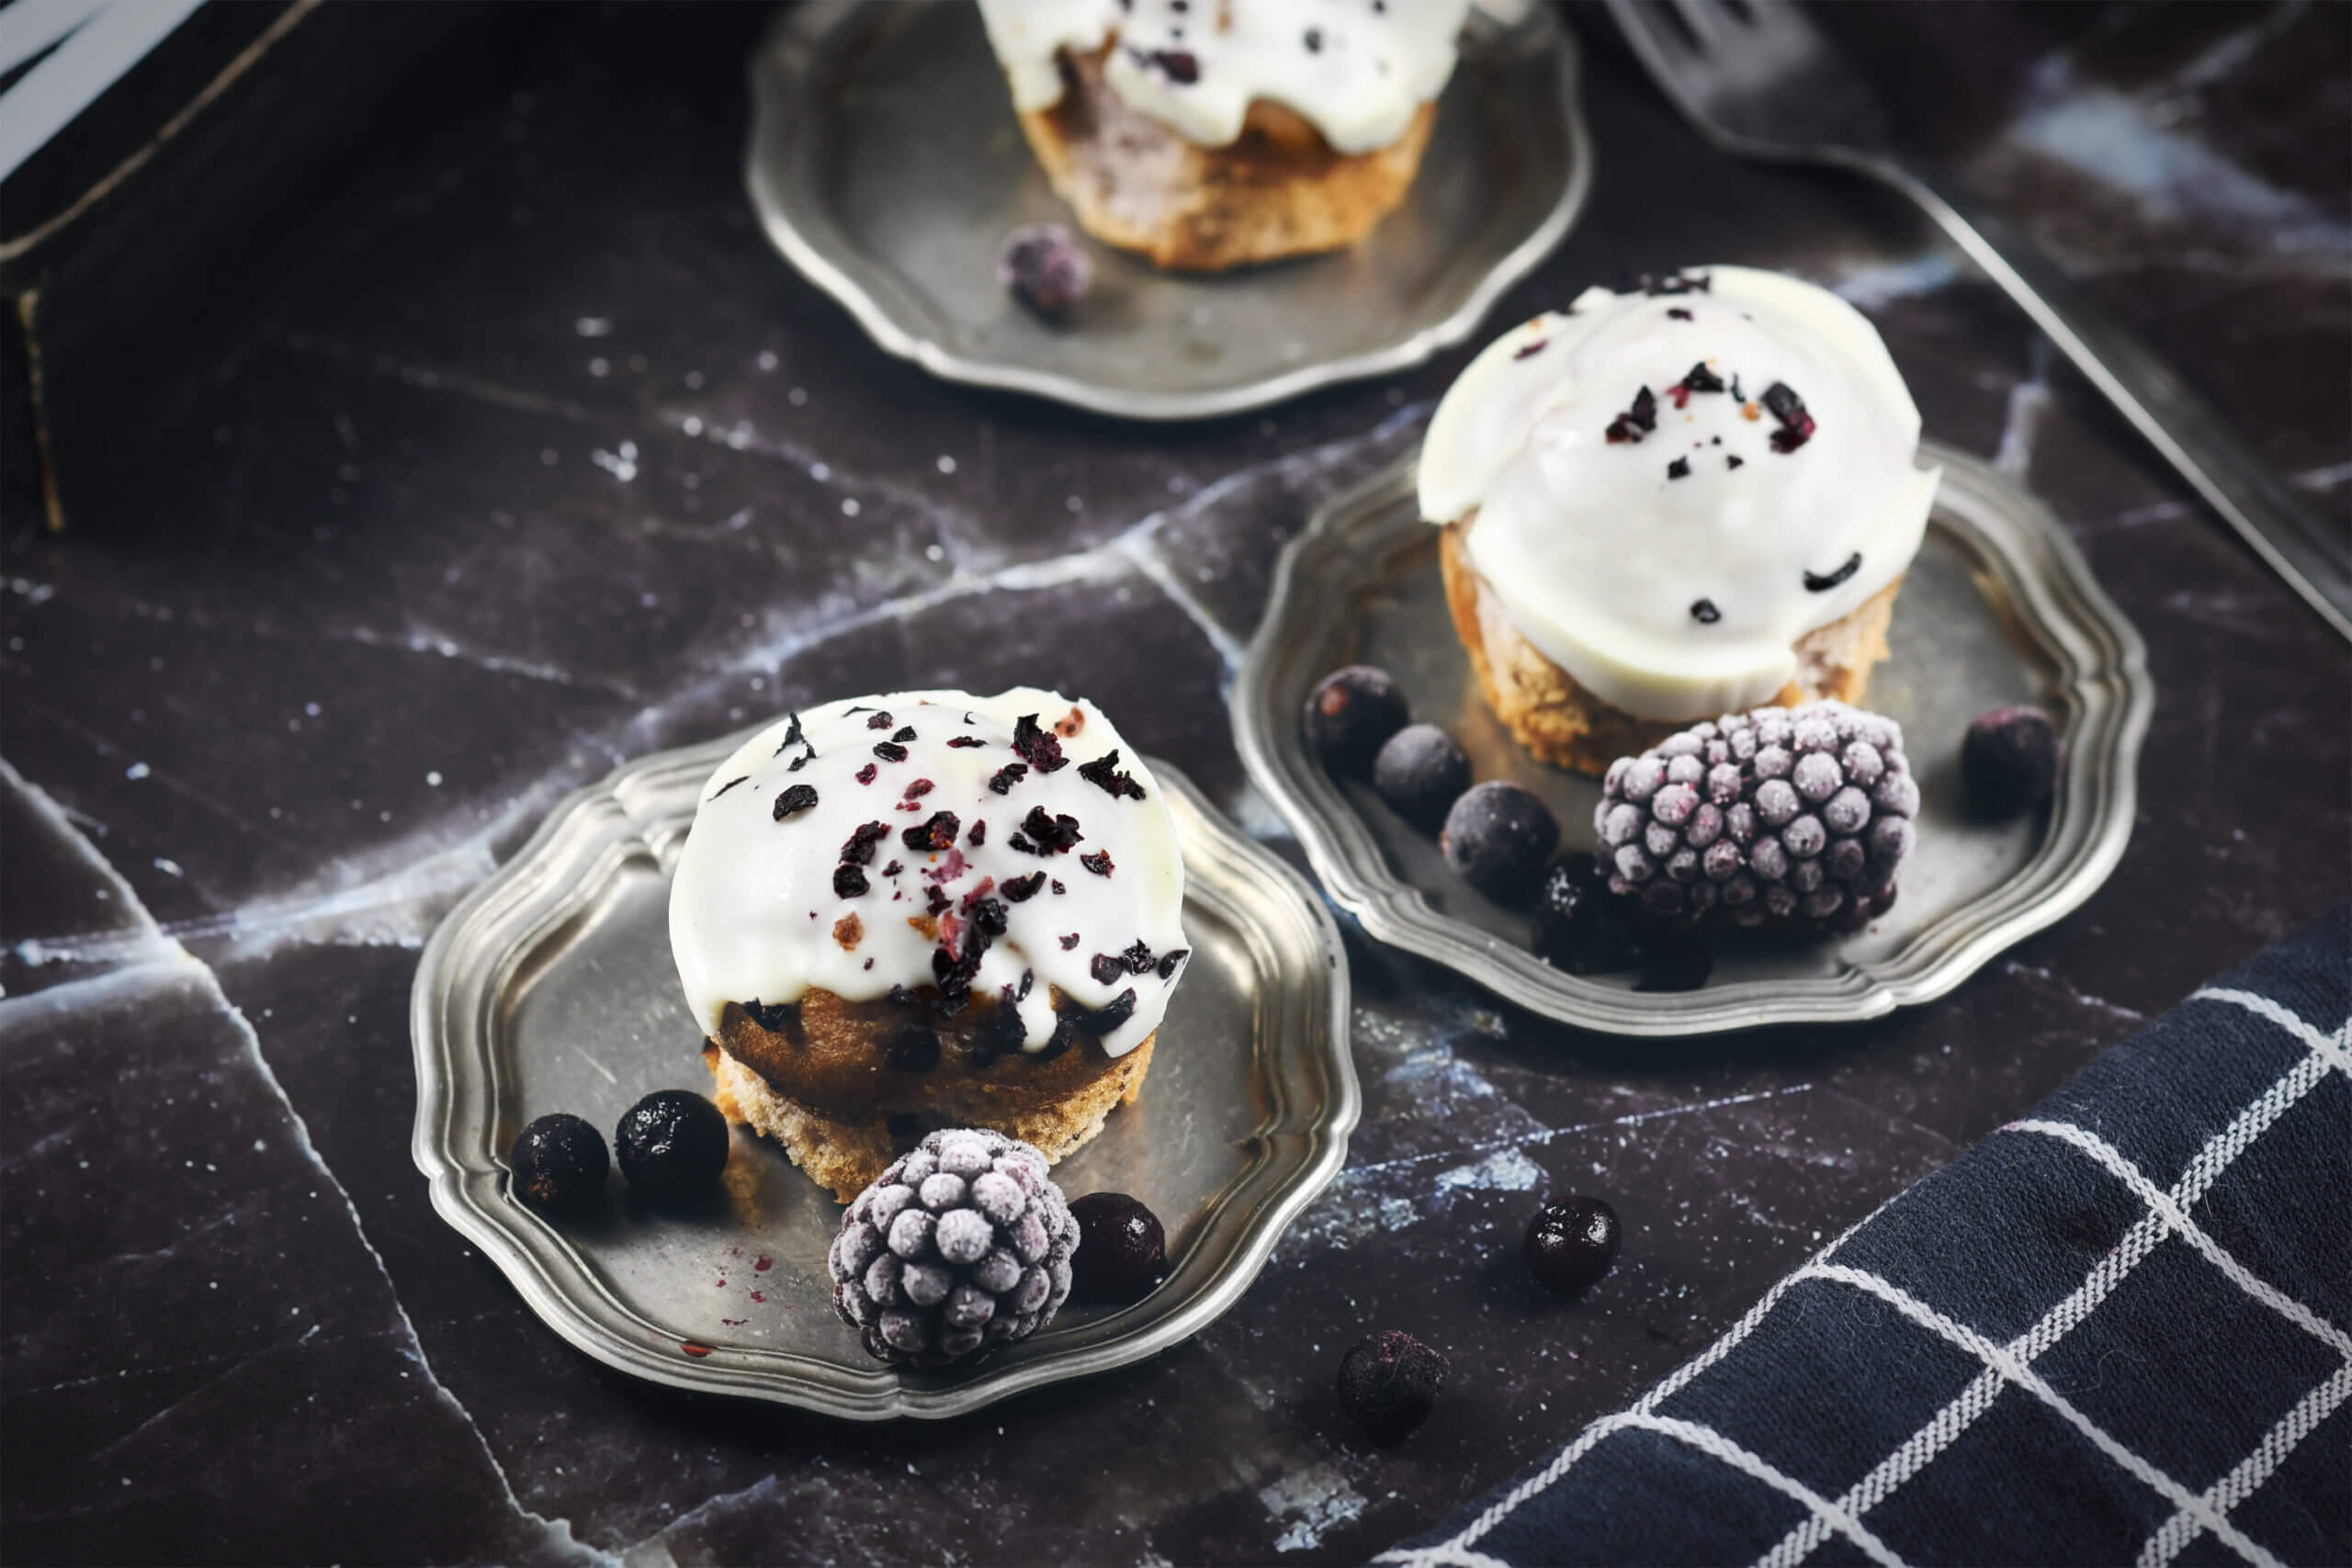 https://www.escoffieronline.com/wp-content/uploads/2014/03/Blueberry-and-blackberry-muffins-with-white-frosting-scaled.jpg